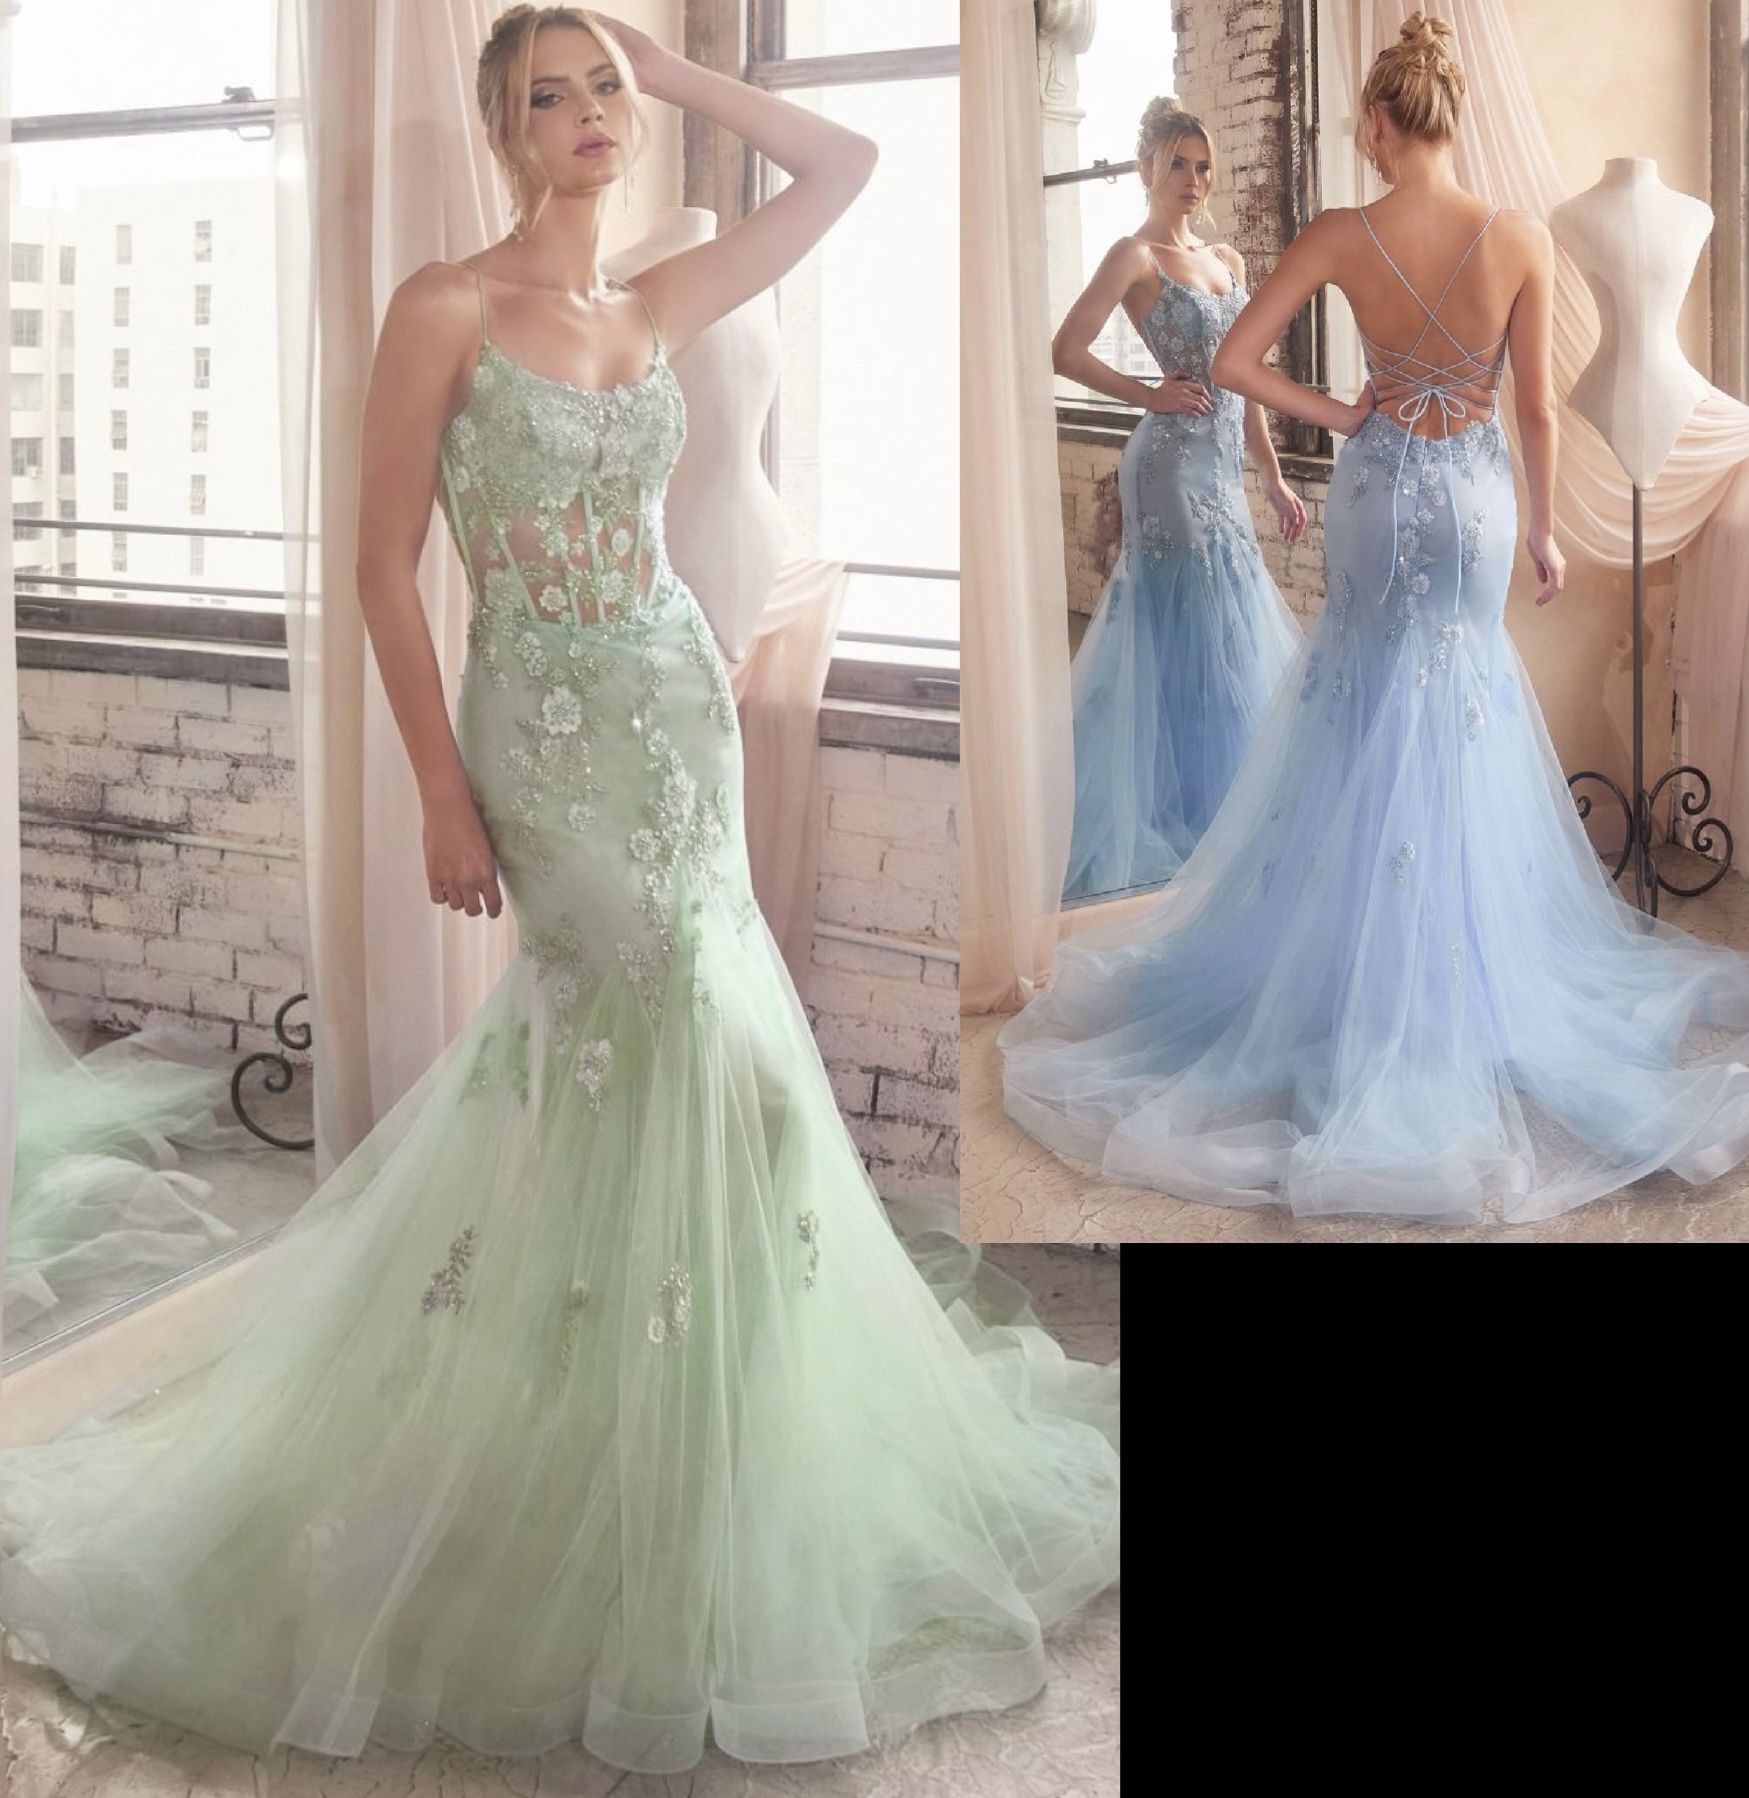 New With Tags Glitter & Lace Fitted Long Formal Dress & Prom Dress $255